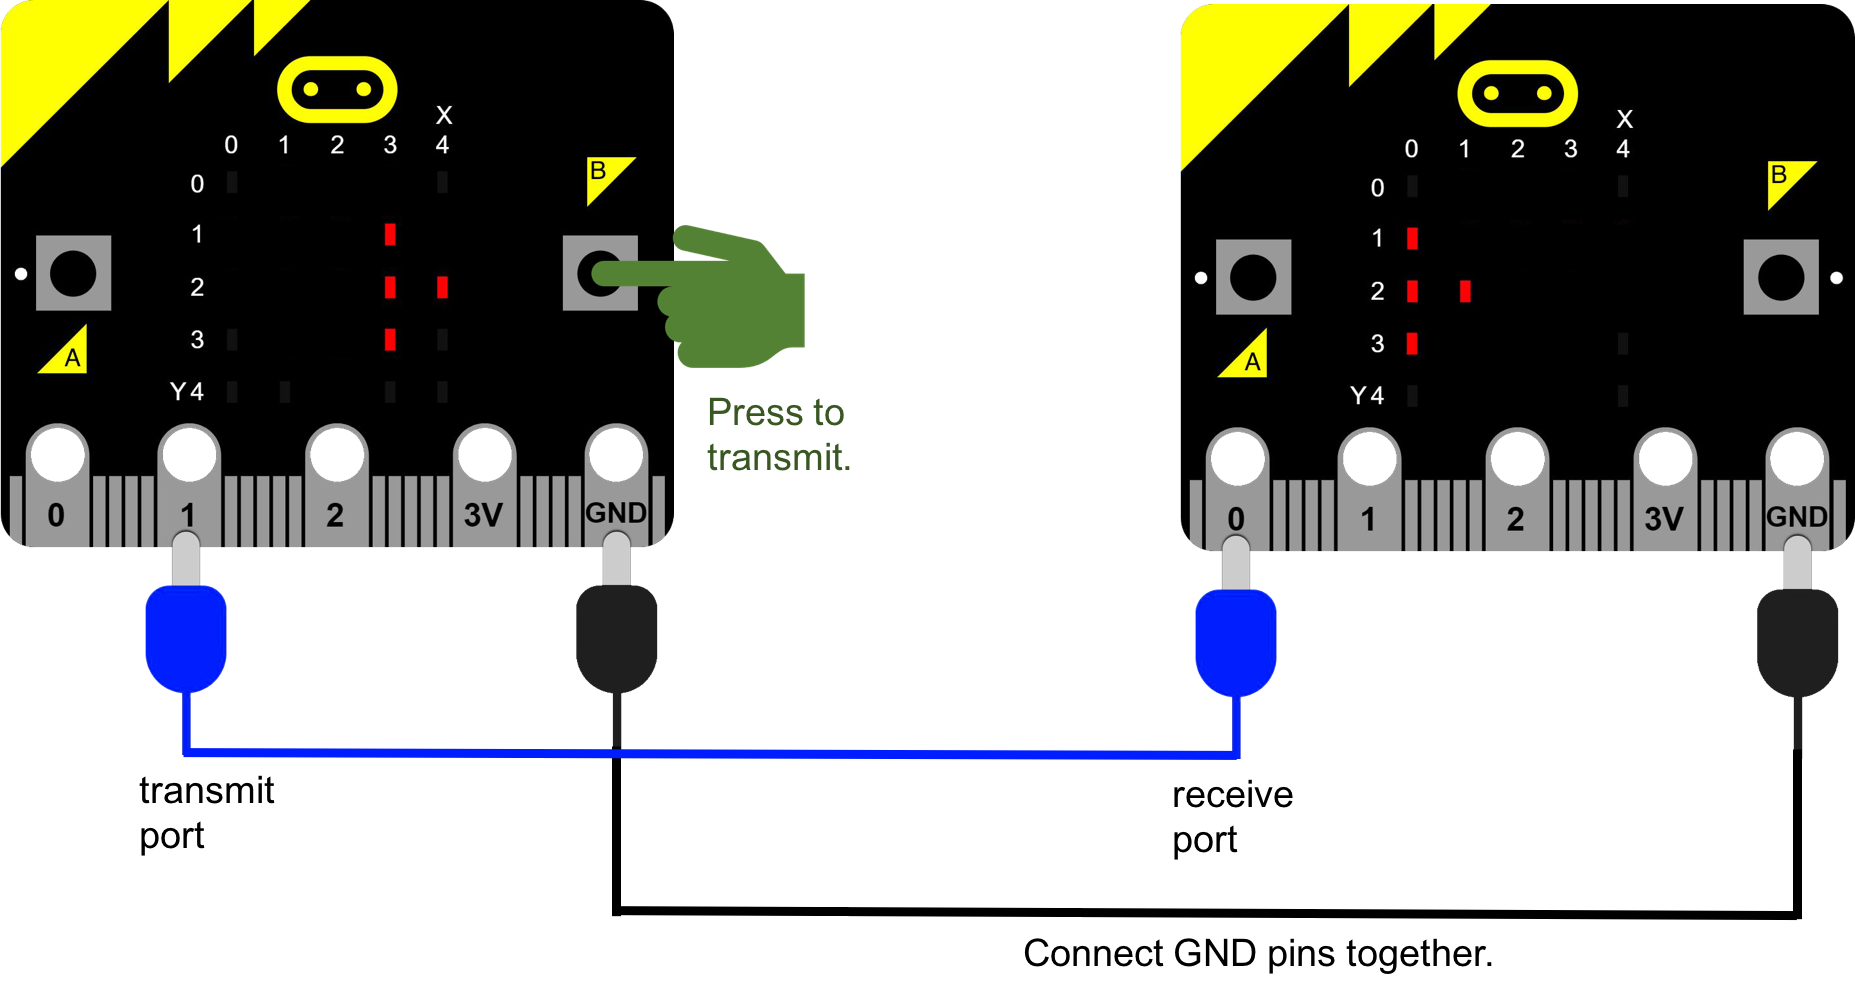 Diagram of two micro:bits connected together. There are two devices connected by two cables. Each device has a grid: an X axis labelled 0, 1, 2, 3, 4; and a Y axis labelled 0, 1, 2, 3, 4. Both devices are yellow Each device has two buttons labelled A and B. Each device has five pins labelled 0, 1, 2, 3V and GND. On Device 1, Button B is being pressed. Device 1 has four lights lit up (X axis listed first, then Y axis): 3, 1; 3, 2; 4, 2; 3, 3. Device 2 has four lights lit up: 0, 1; 0, 2; 1, 2; 0, 3. Connecting cable 1 is connected to Device 1, Pin 1. This is labelled transmit port. It is connected to Device 2, Pin 0. This is labelled receive port. This cable is blue. Connecting cable 2 connects the GND pins on the two devices together. This cable is black.